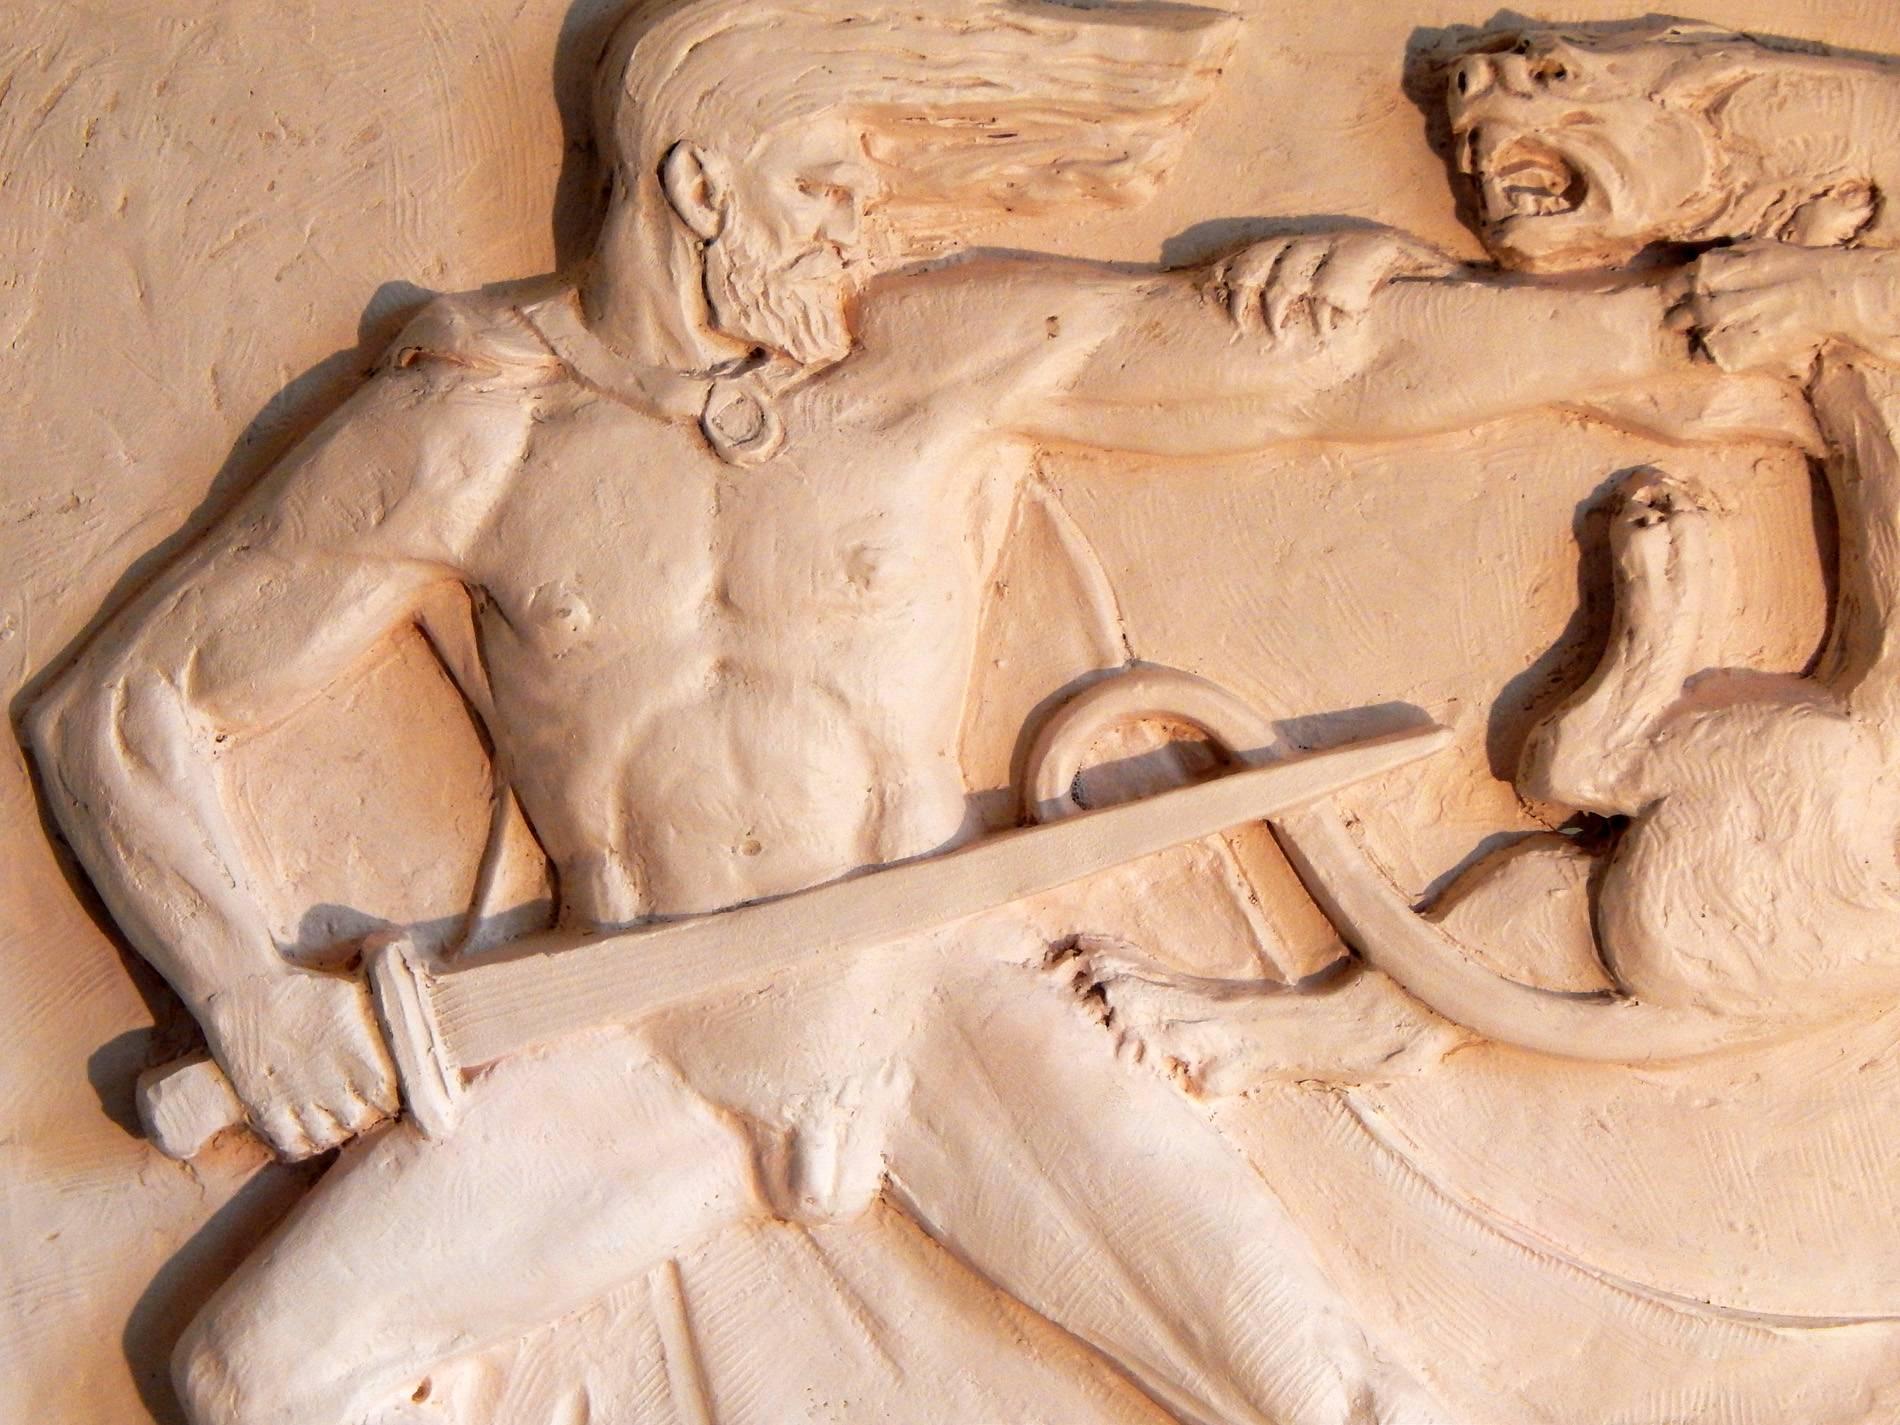 This unique panel, depicting a nude Hercules figure with sword in hand, fending off the snarling Nemean lion, represents the first of his famous Twelve Labors. The strong, stylized figure of Hercules, and the bold relief of the panel are Classic Art